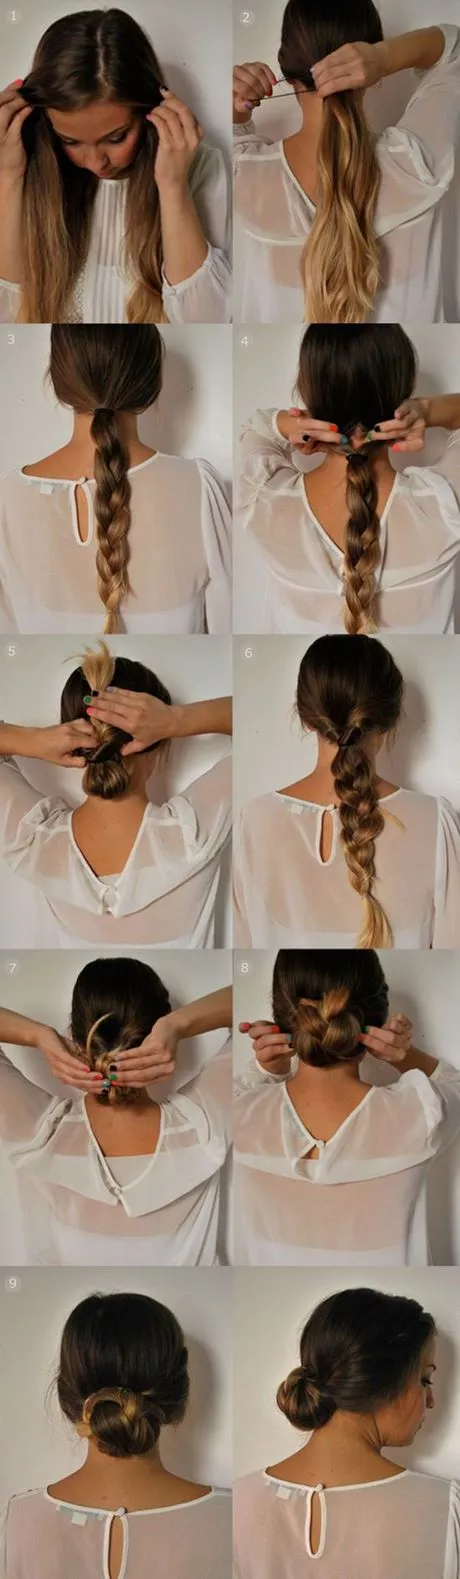 Super cute and easy hairstyles super-cute-and-easy-hairstyles-00-1-1